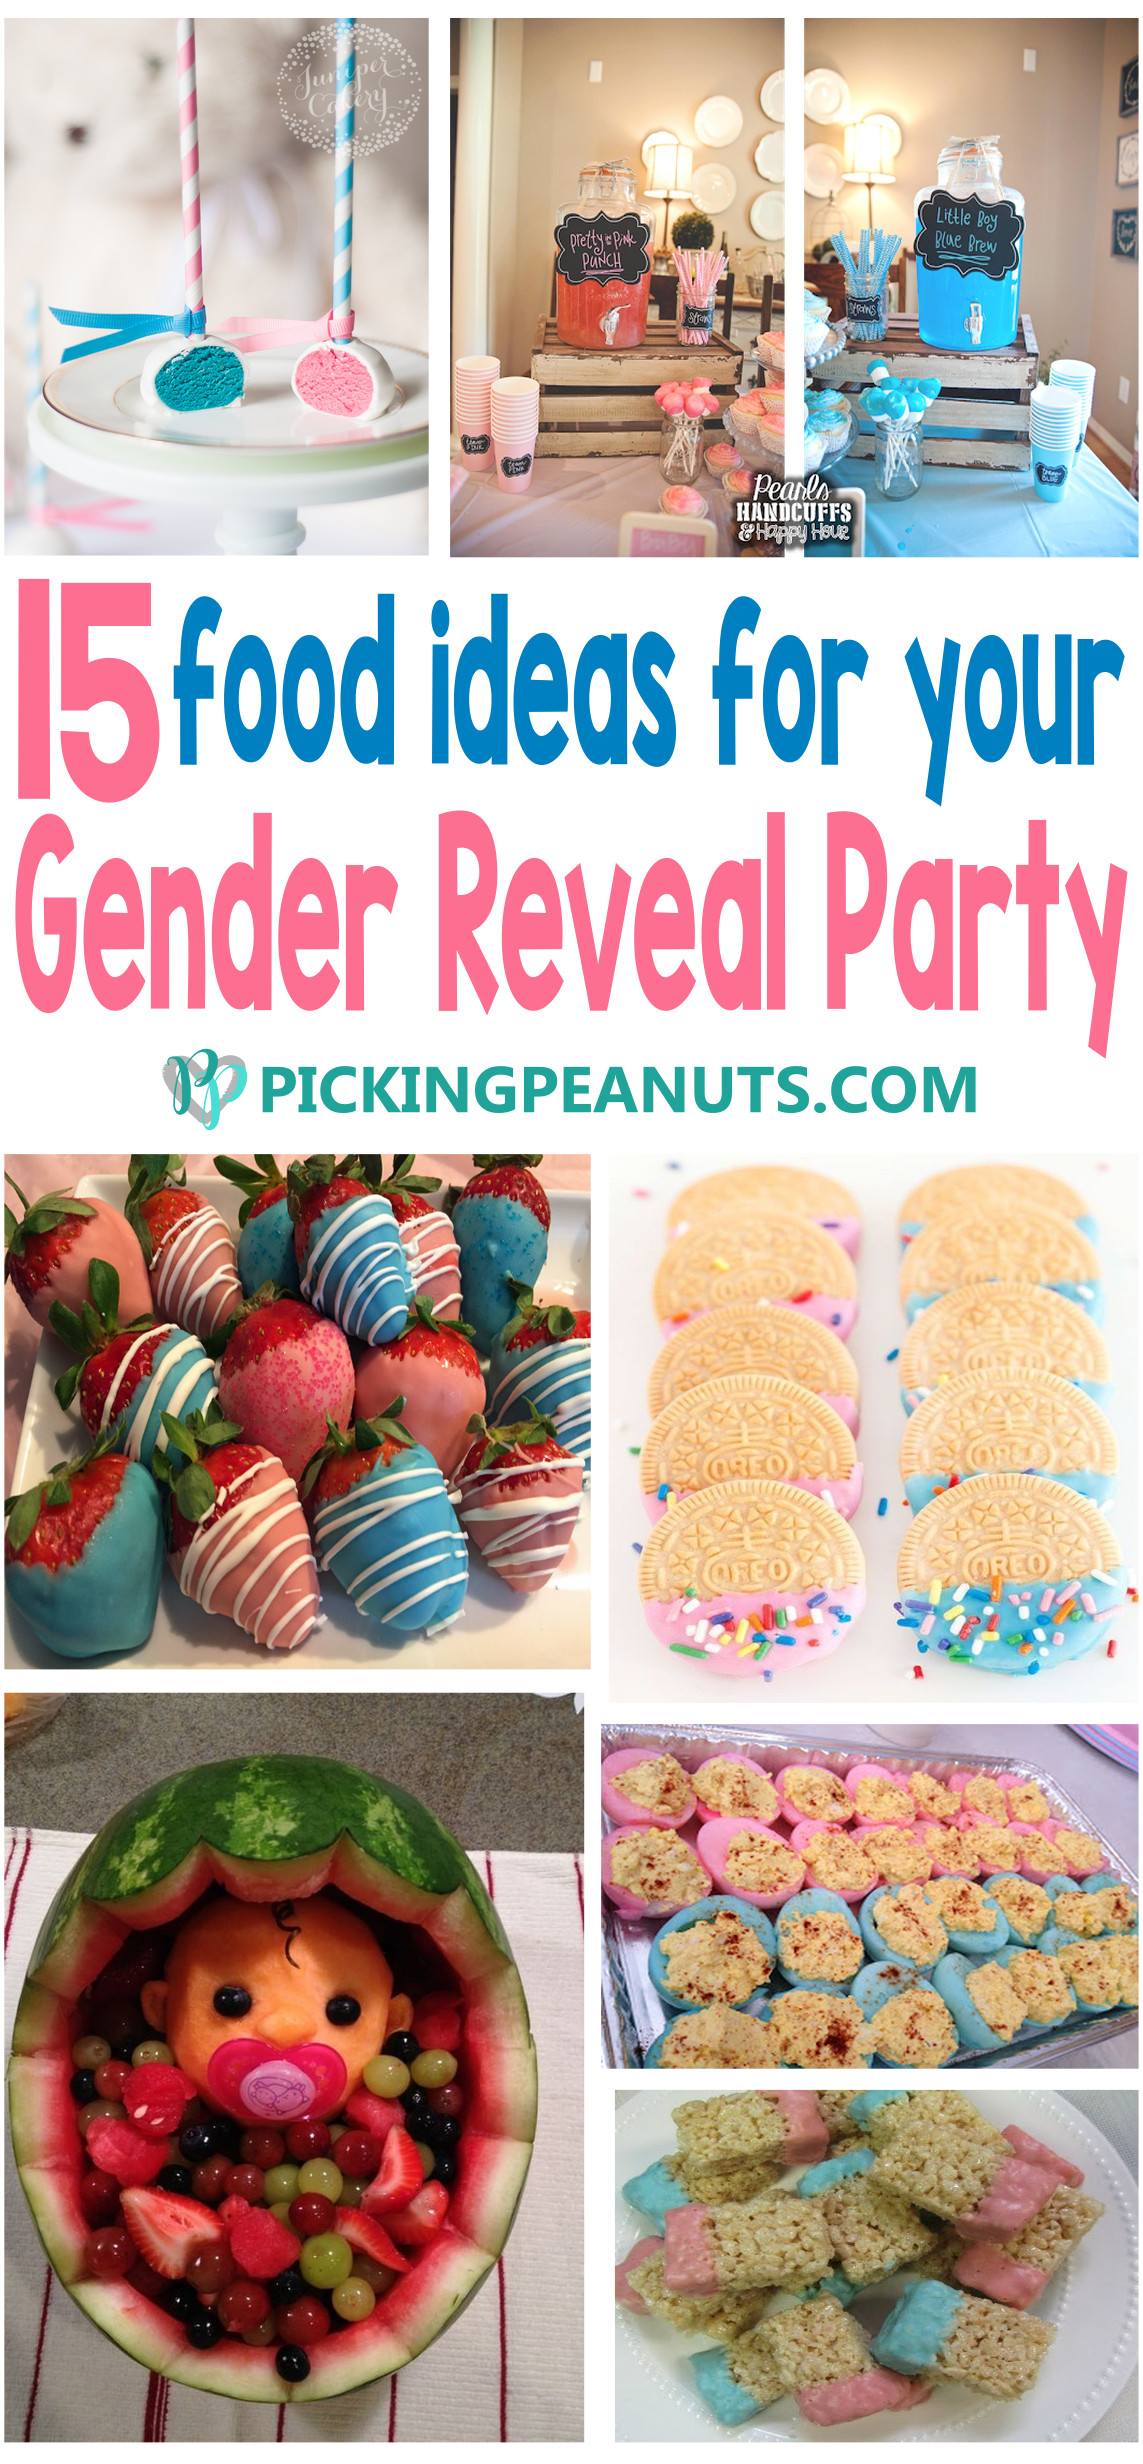 Cheap Gender Reveal Party Ideas
 15 Gender Reveal Party Food Ideas Picking Peanuts